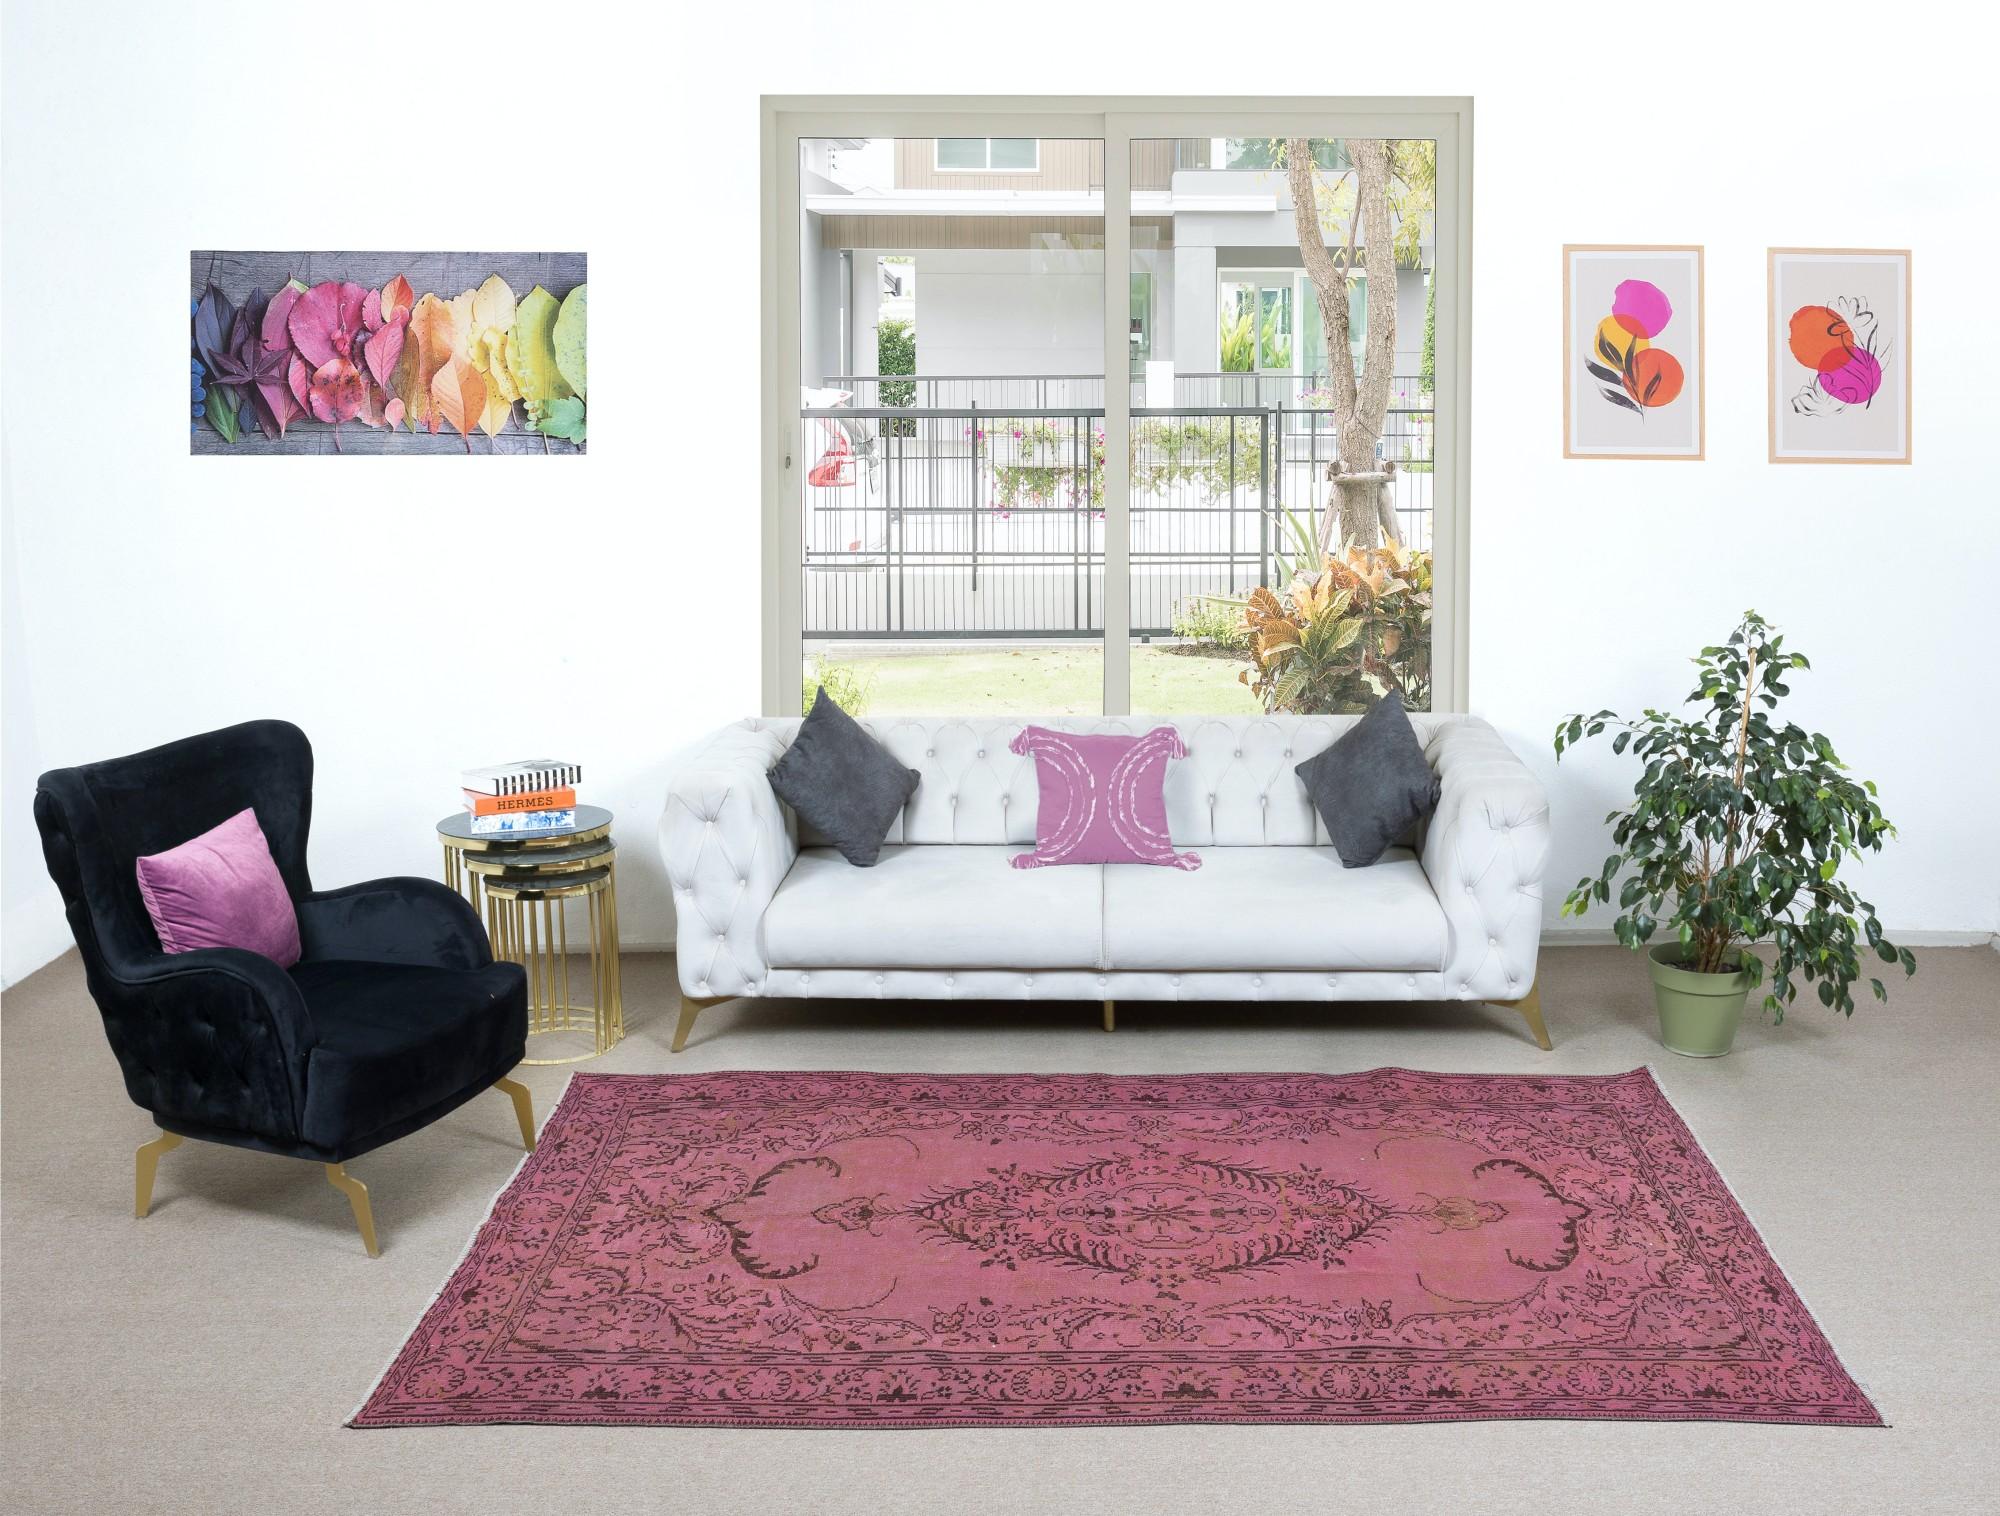 20th Century 6x9.3 Ft Pink Over-Dyed Handmade Turkish Area Rug for Modern Home & Office Decor